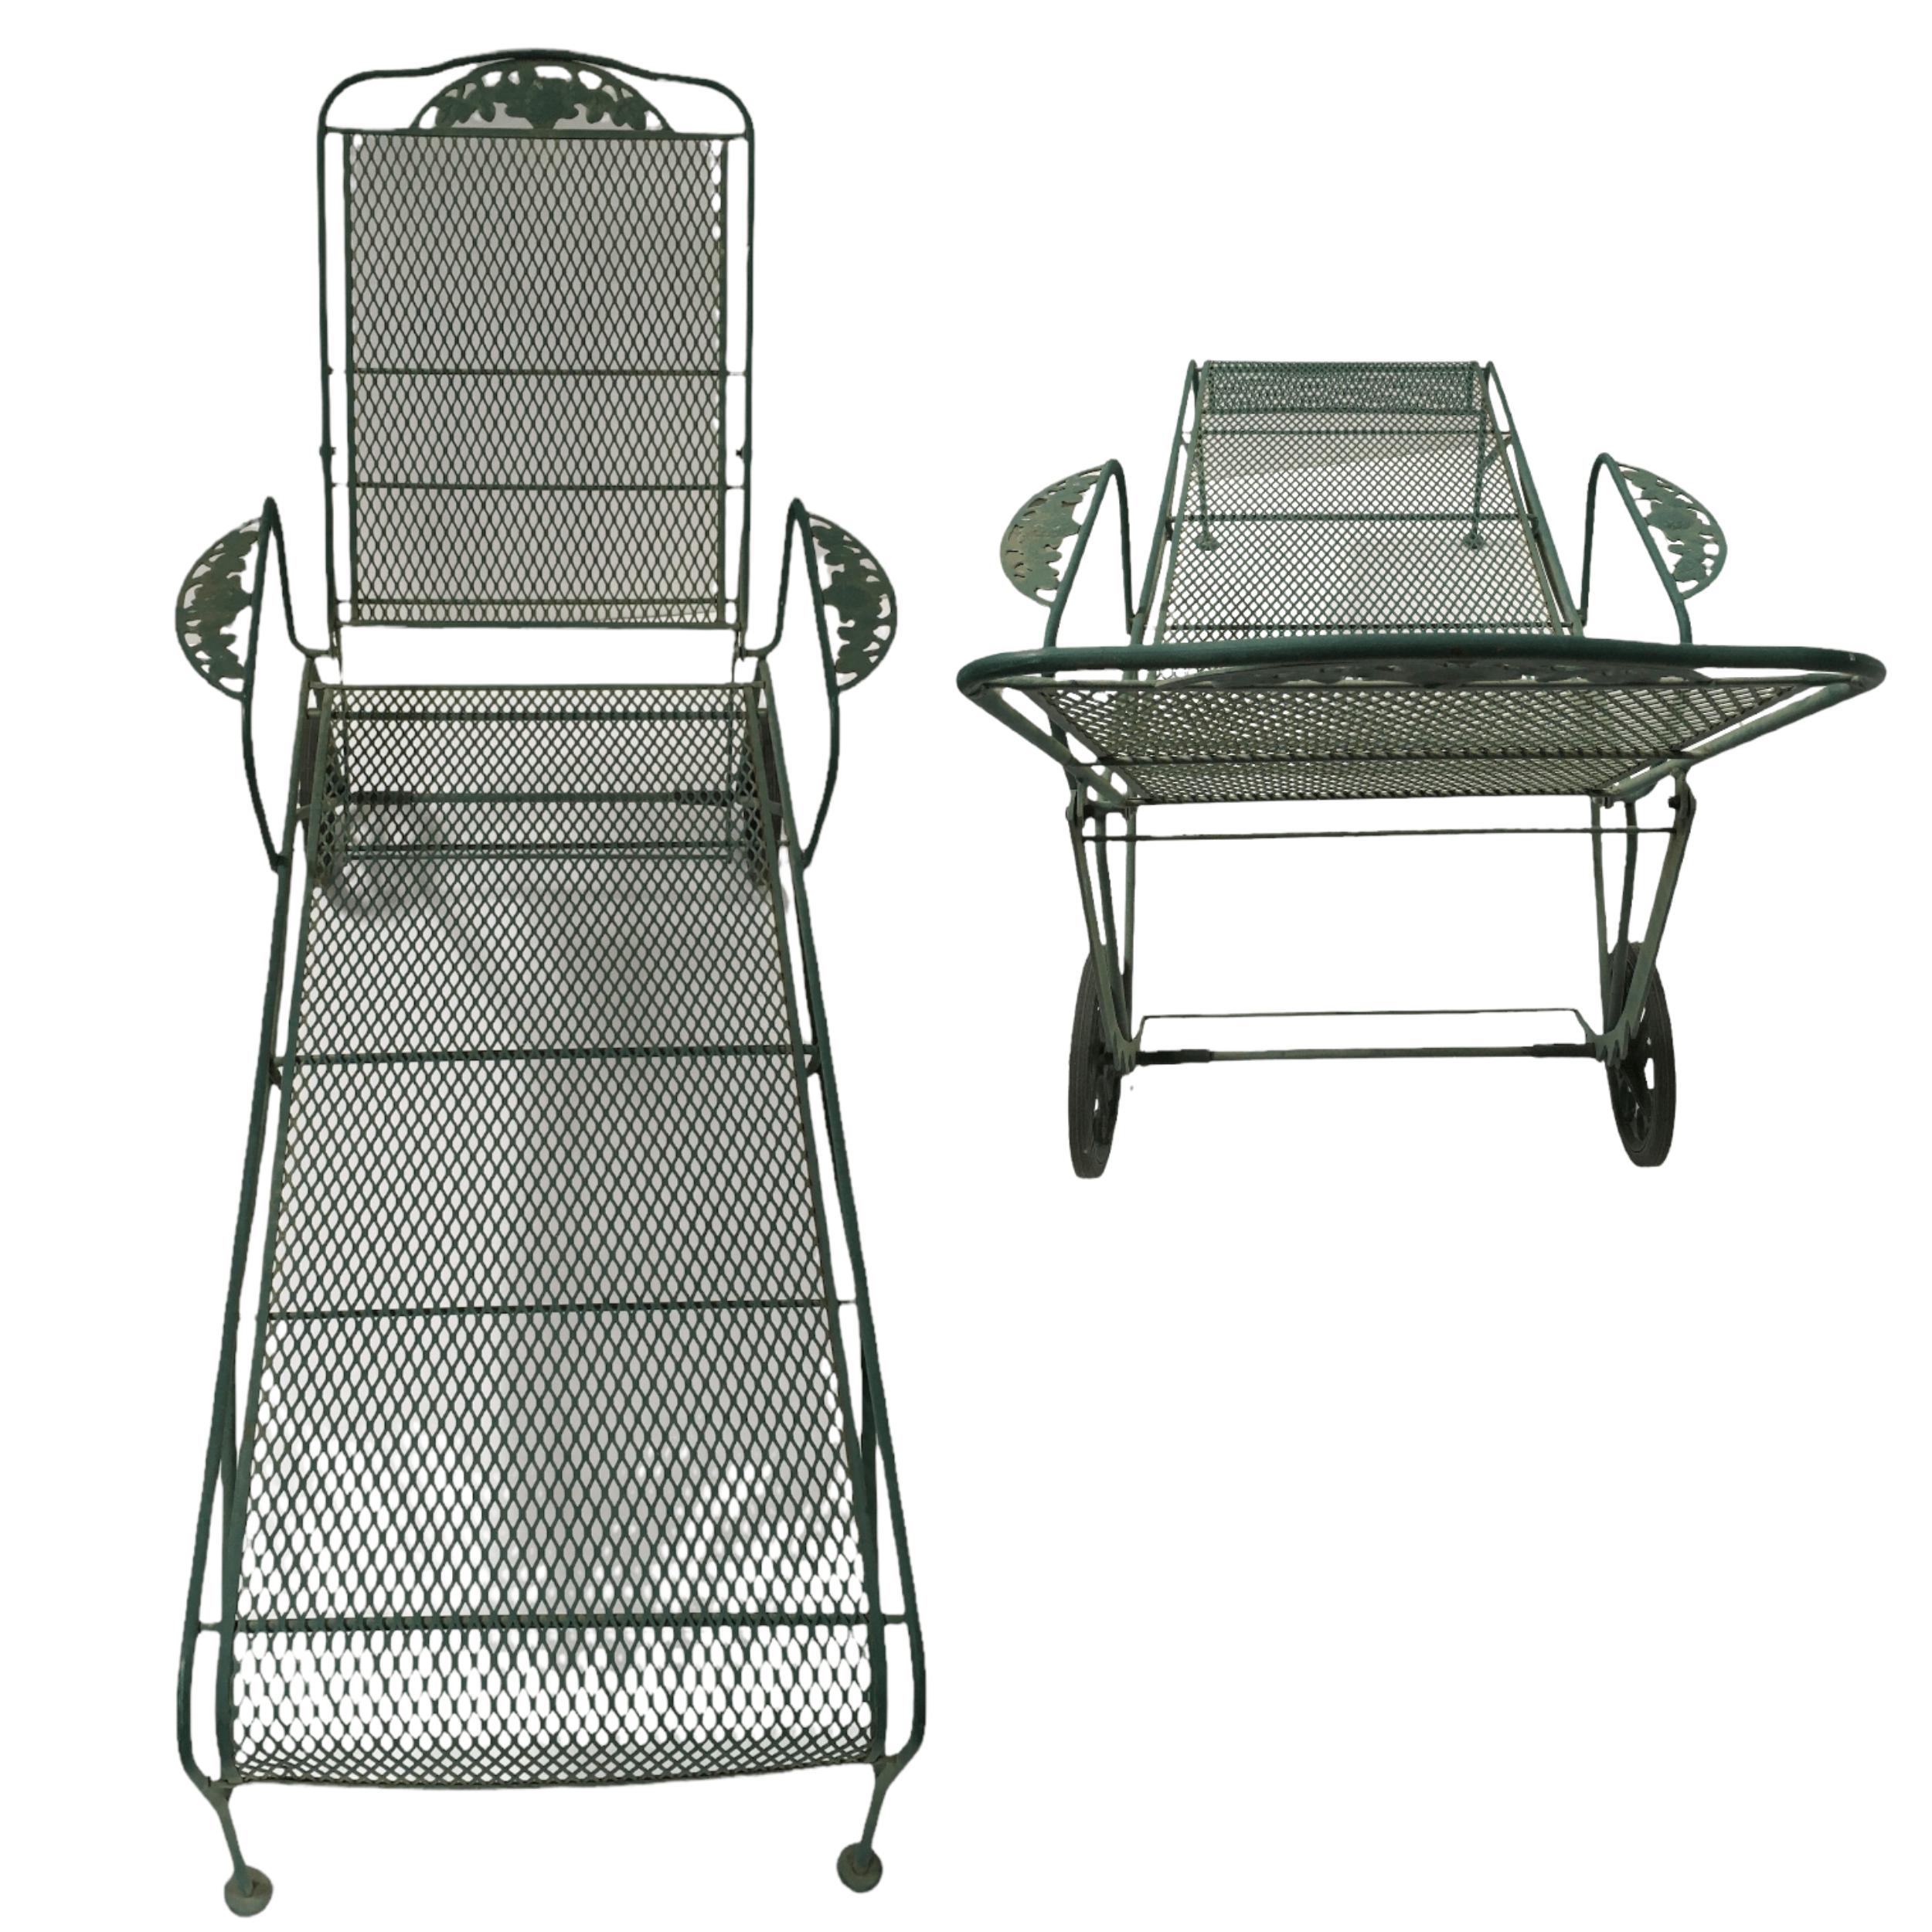 Set of two Wrought Iron adjustable back rolling chaise Lounger with mesh seats in Green by Woodard. This set of 2 rolling loungers is heavily made with a wrought iron frame and steel mesh seats in green with an adjustable back with 5 possible